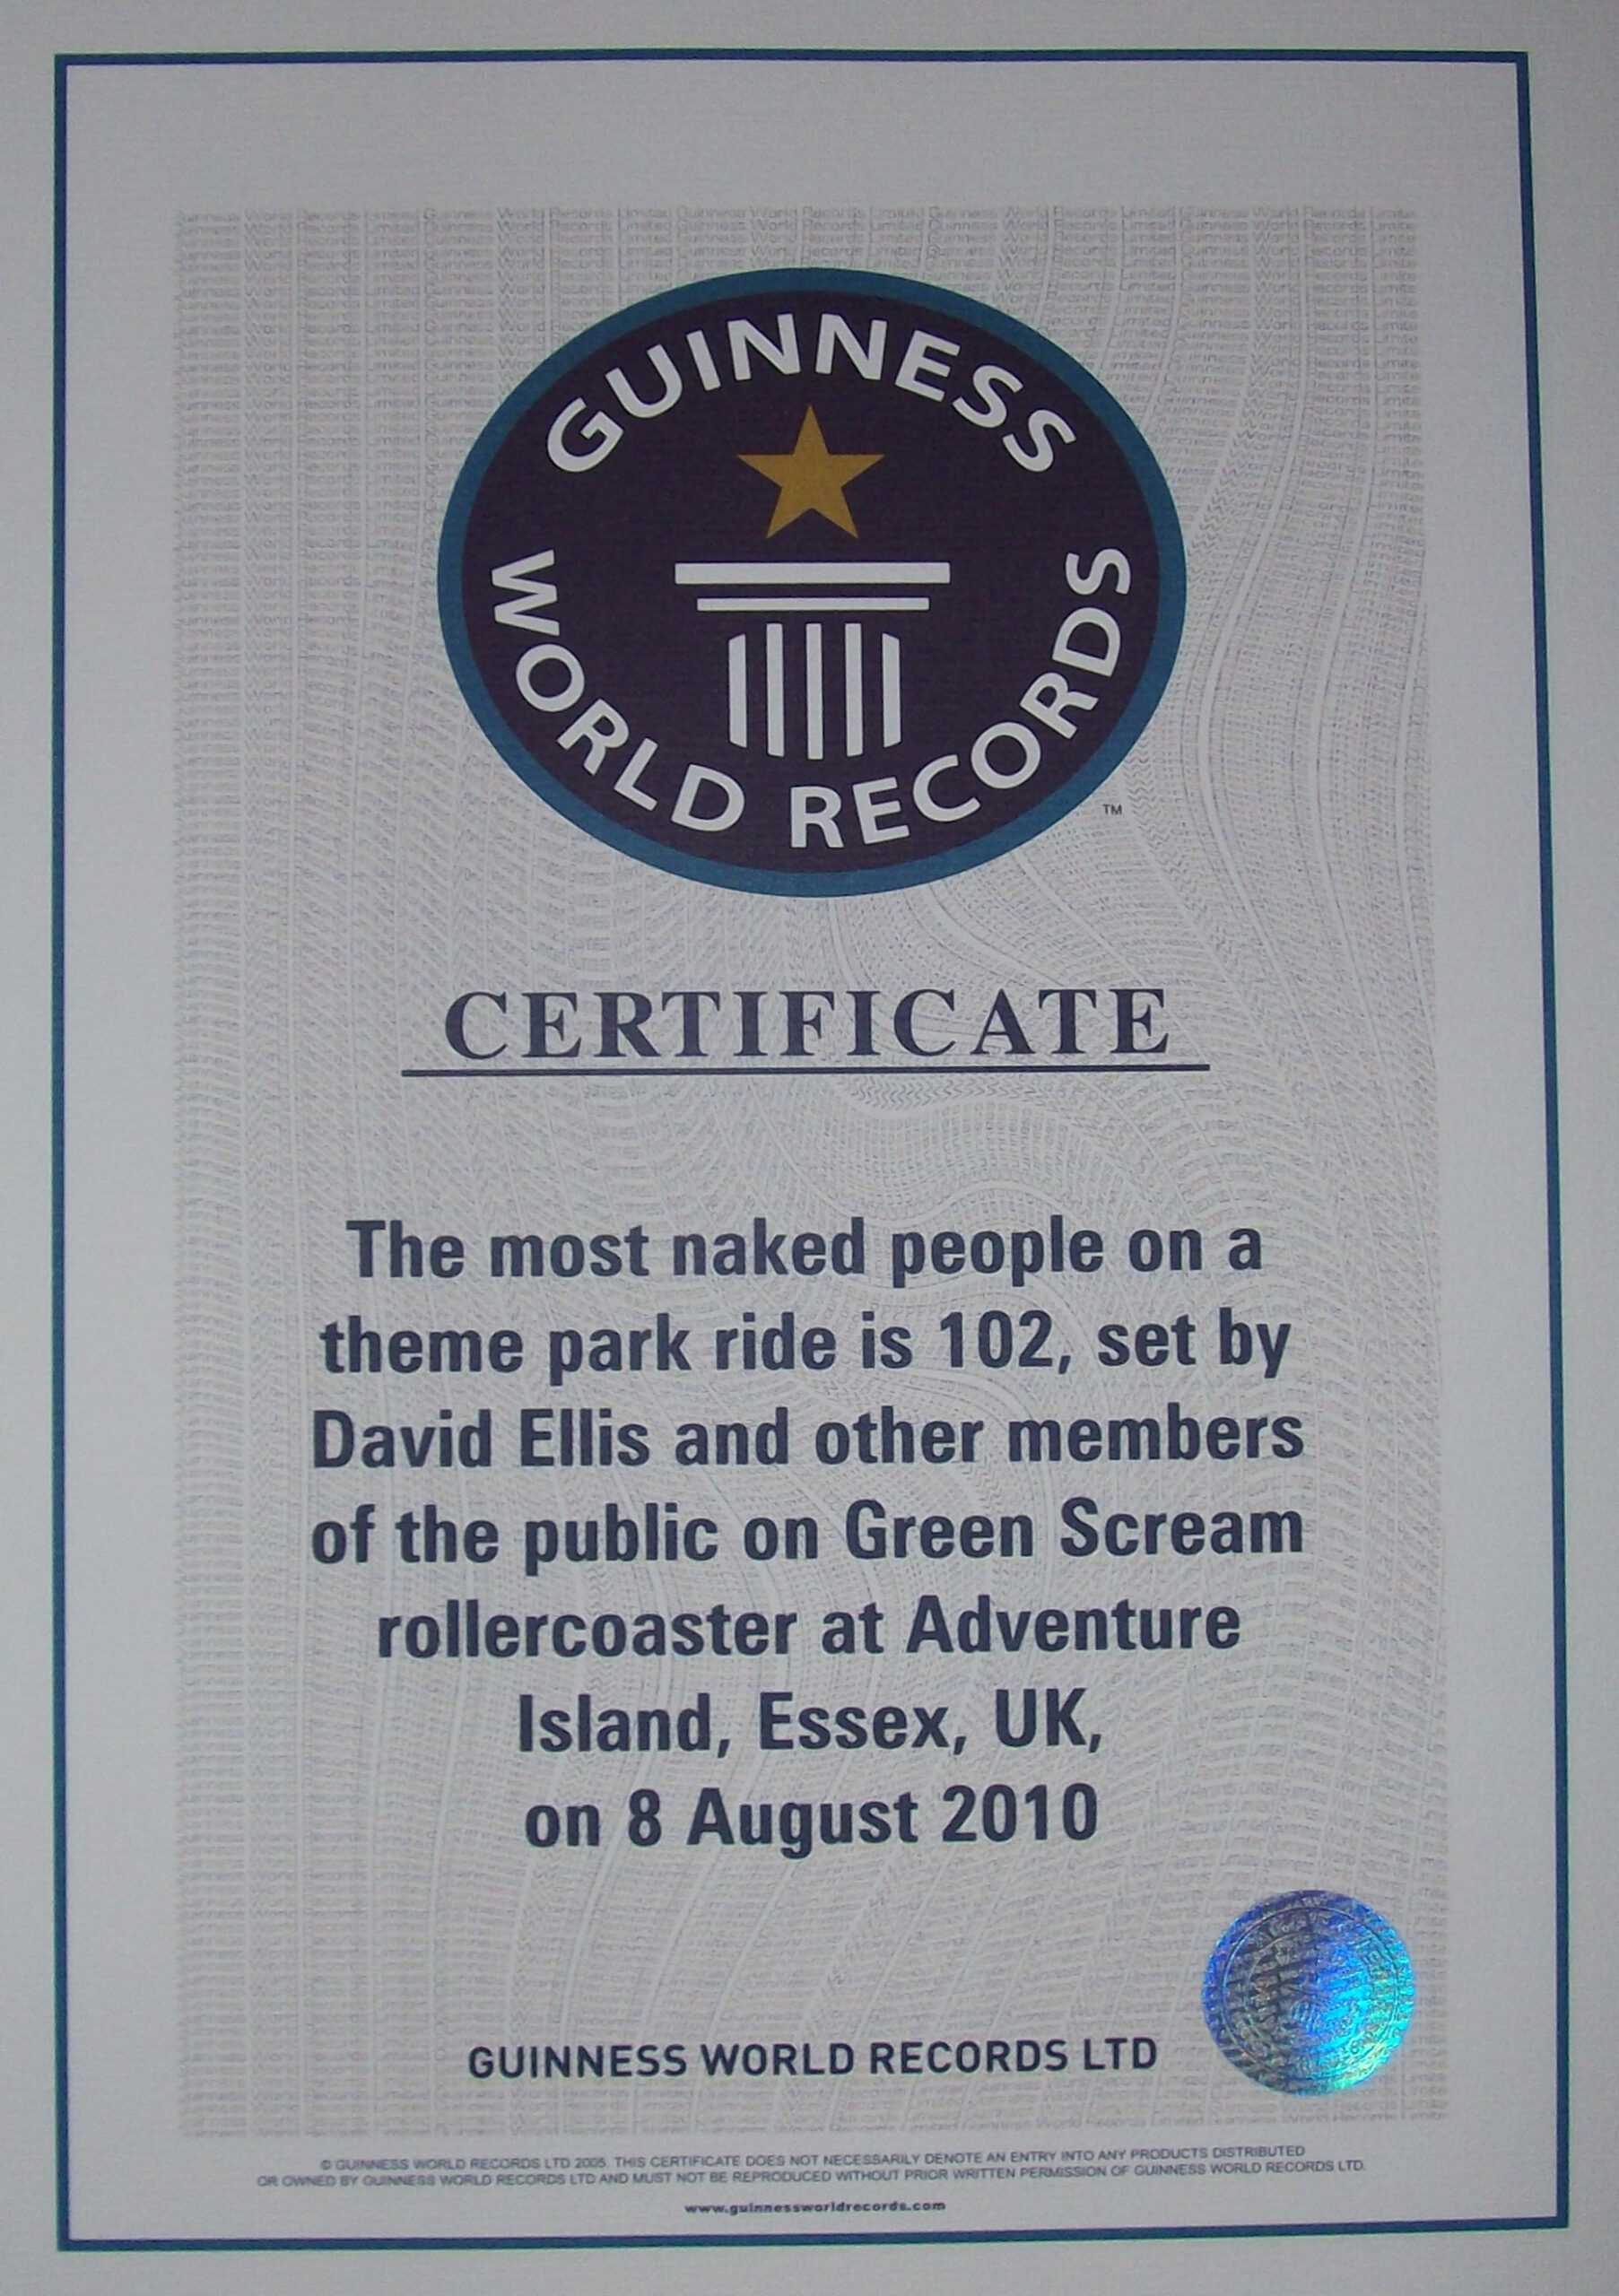 Guinness World Record Certificate Template – Karan.ald2014 Throughout Guinness World Record Certificate Template